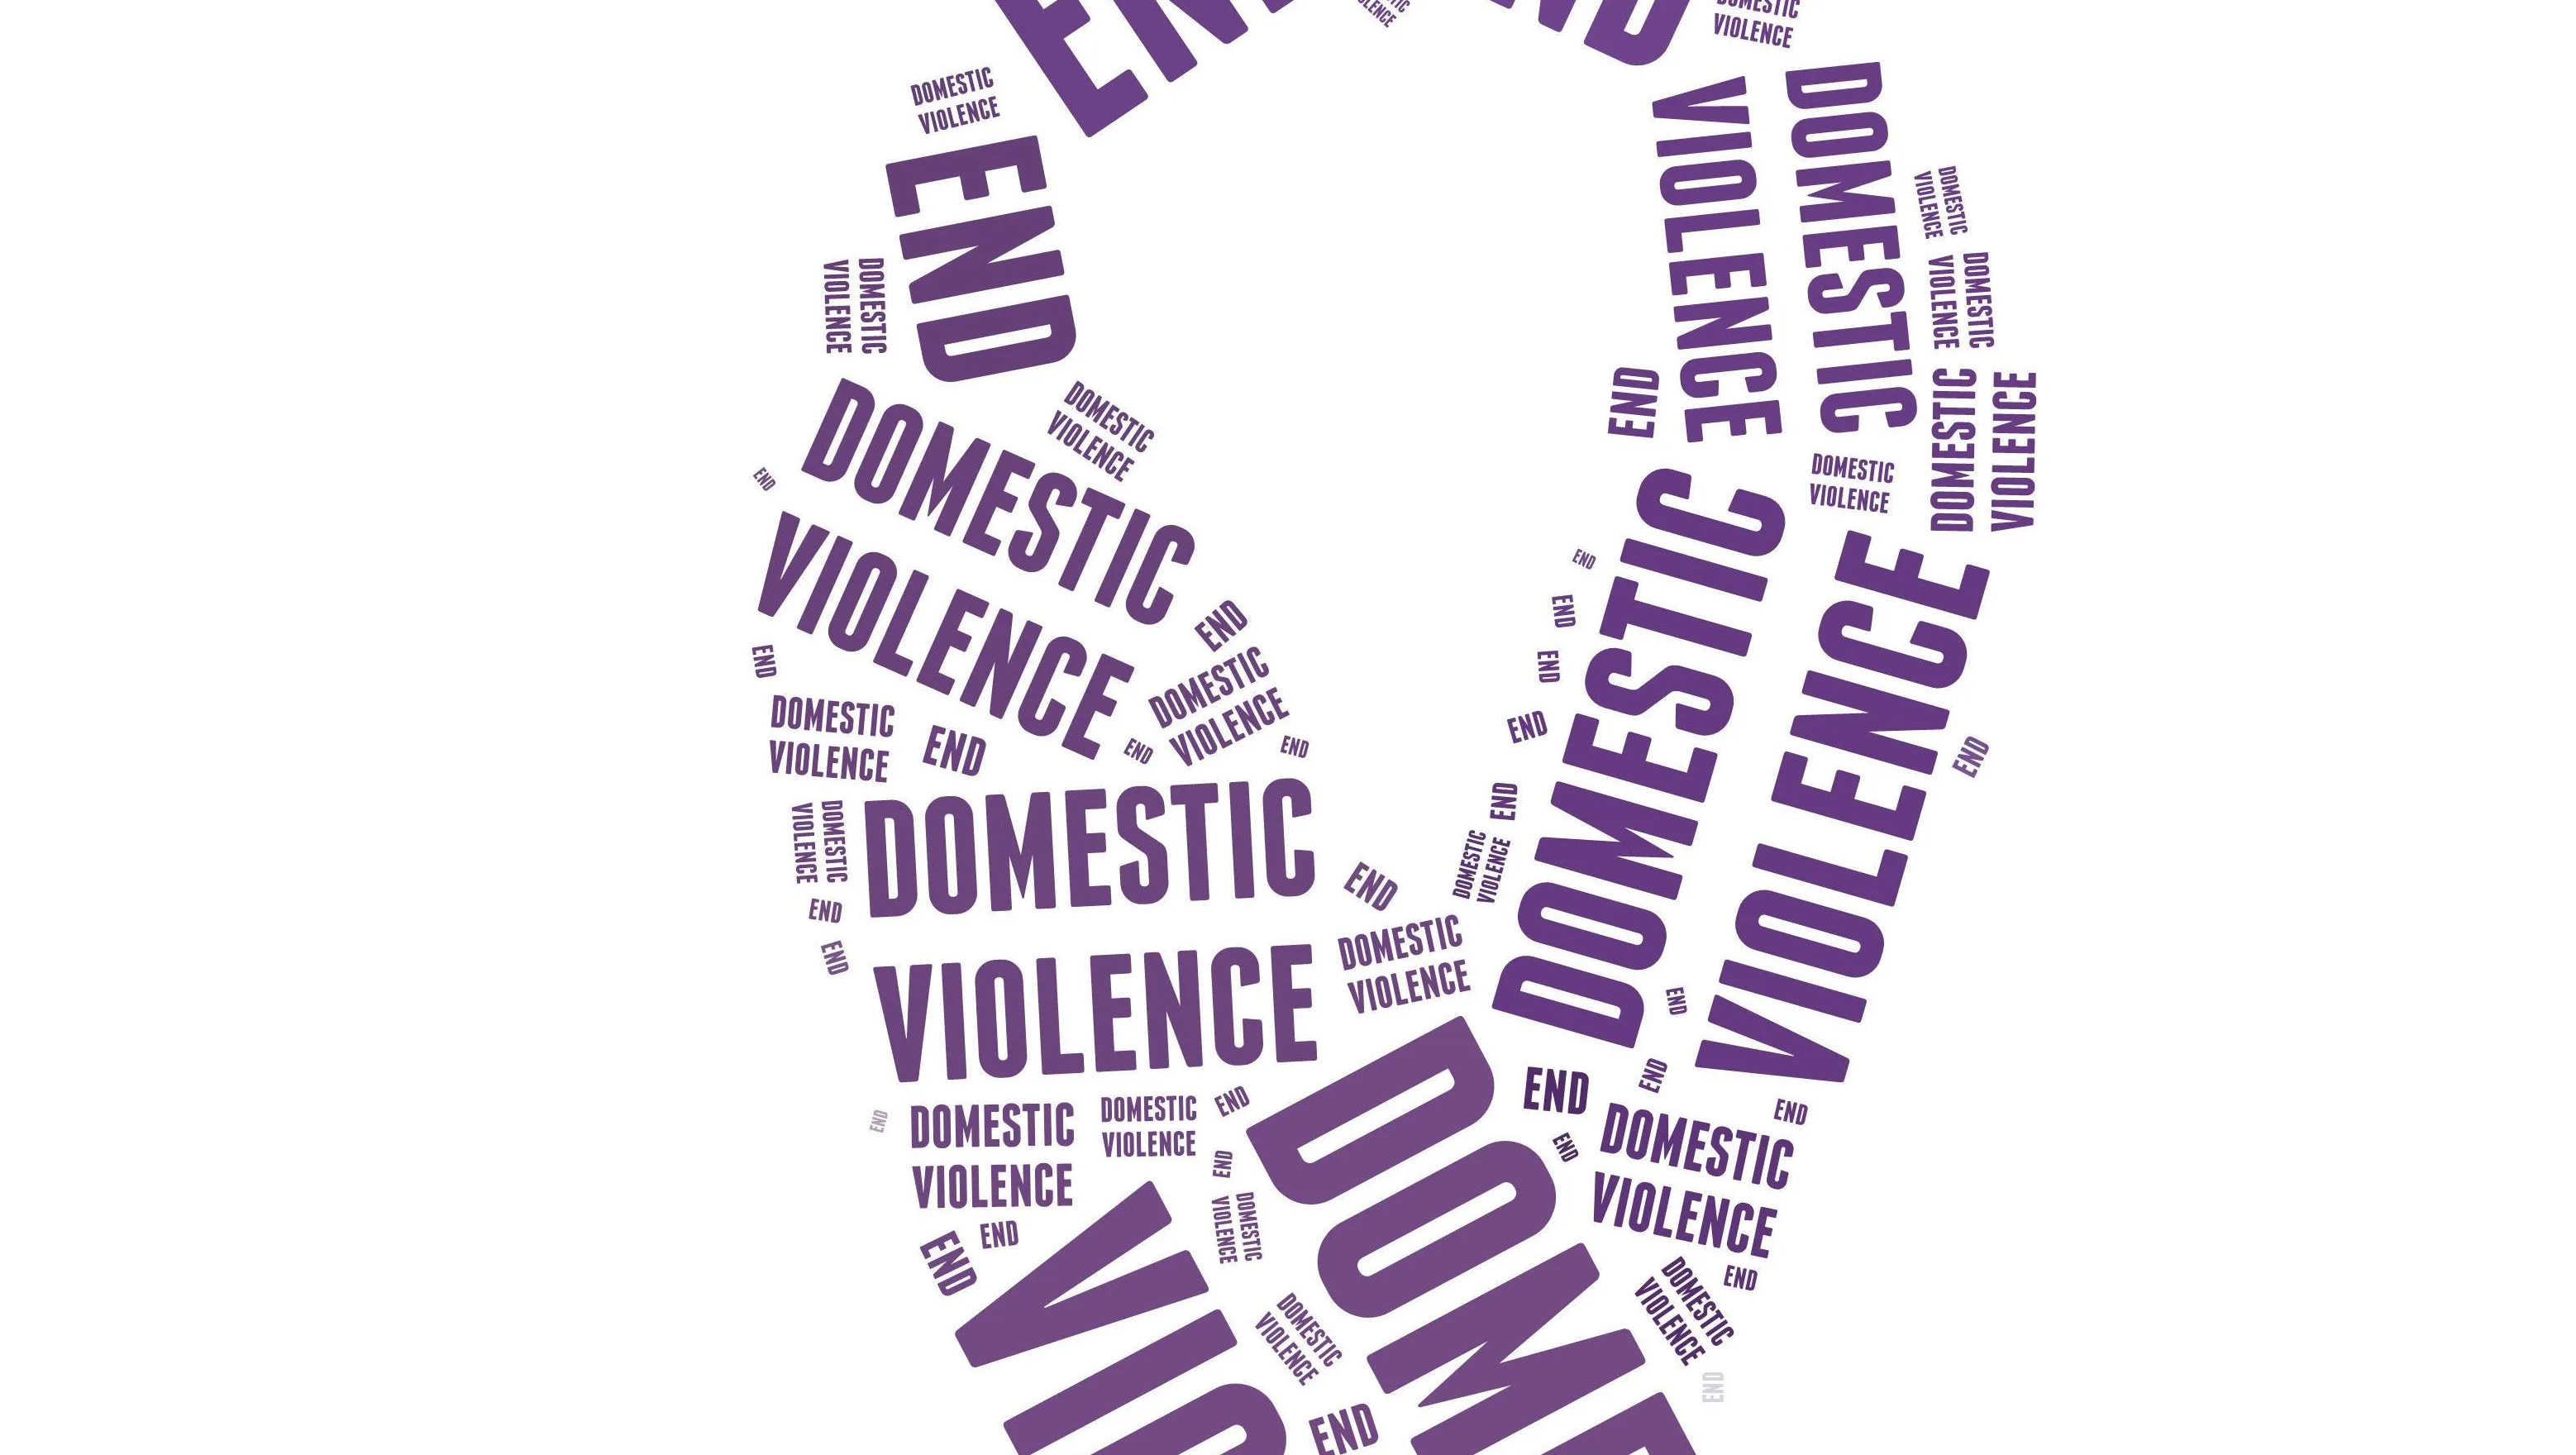 169 a day: Reports of domestic violence in Tennessee reach tens of thousands each year